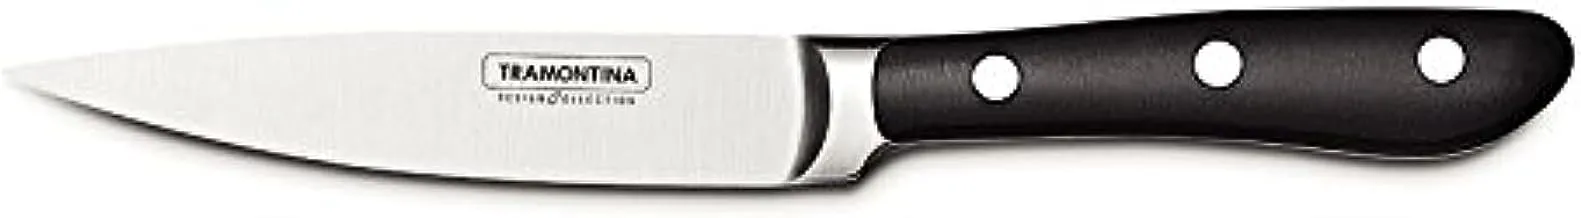 Tramontina Prochef 4 Inches Vegetable and Fruit Knife with Stainless Steel Blade and Black Polycarbonate and Fiberglass Handle